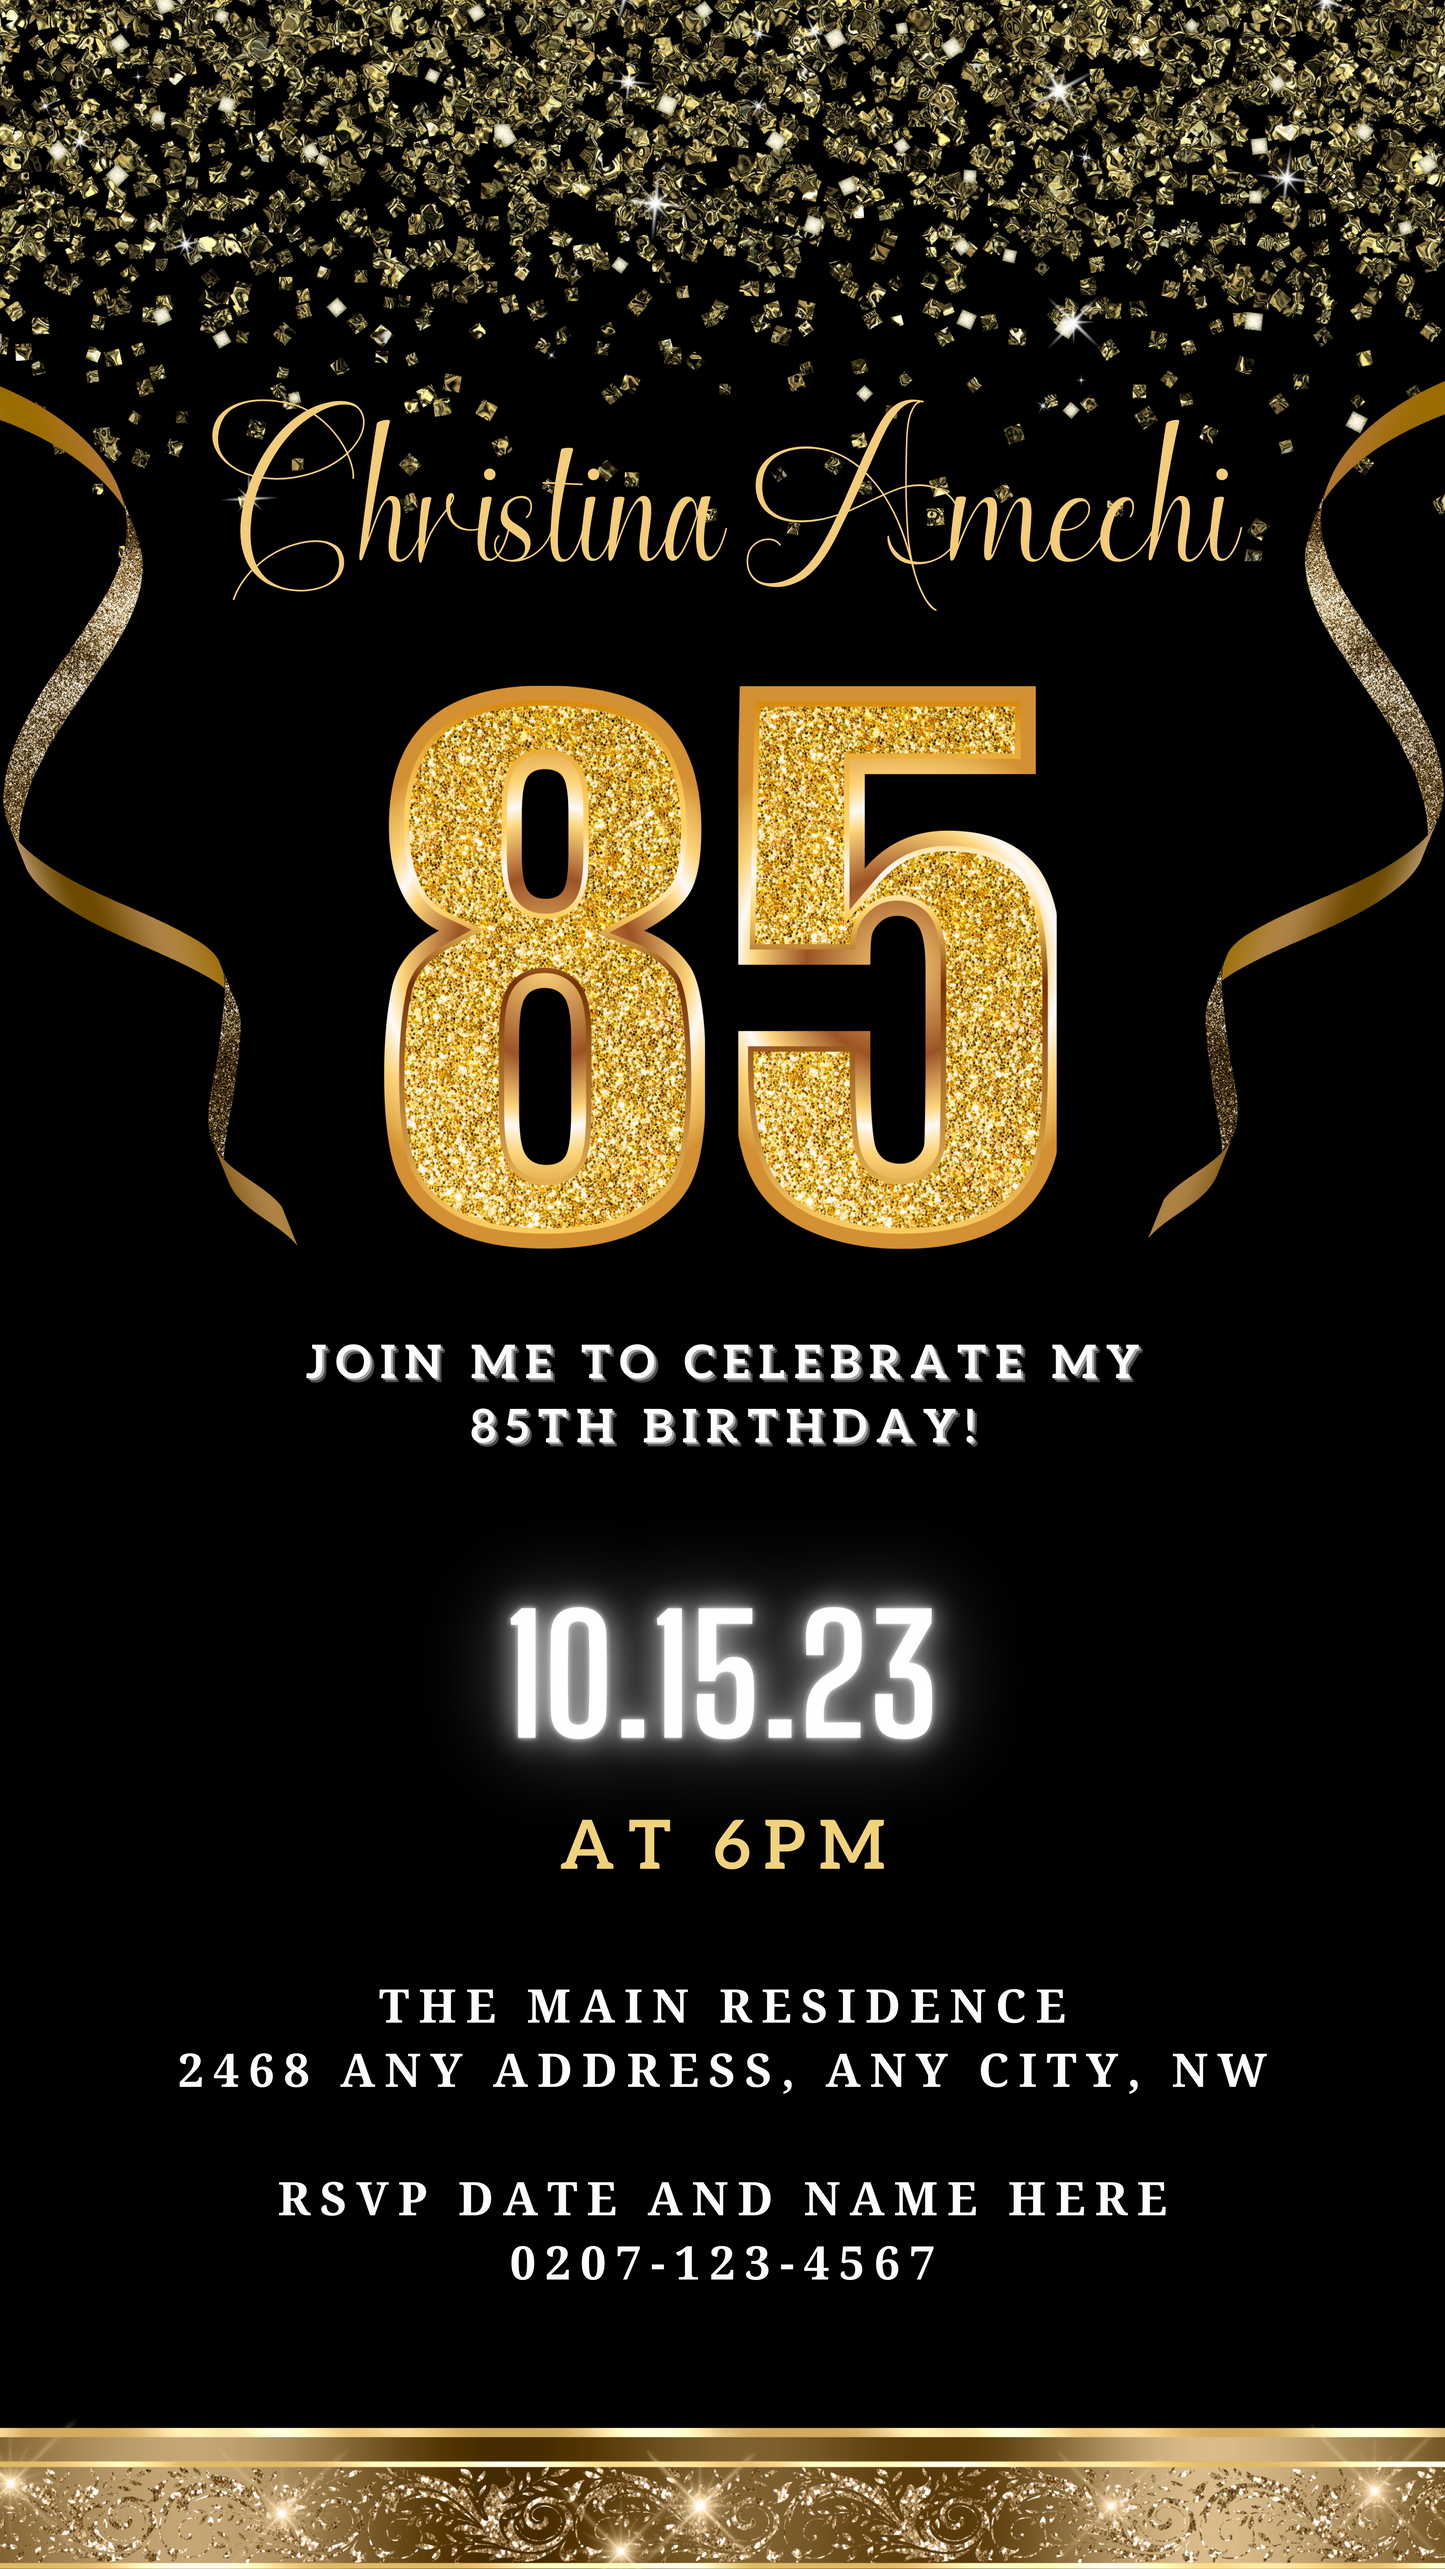 Black Gold Confetti 85th Birthday Evite with gold text and ribbons, customizable via Canva for digital sharing.